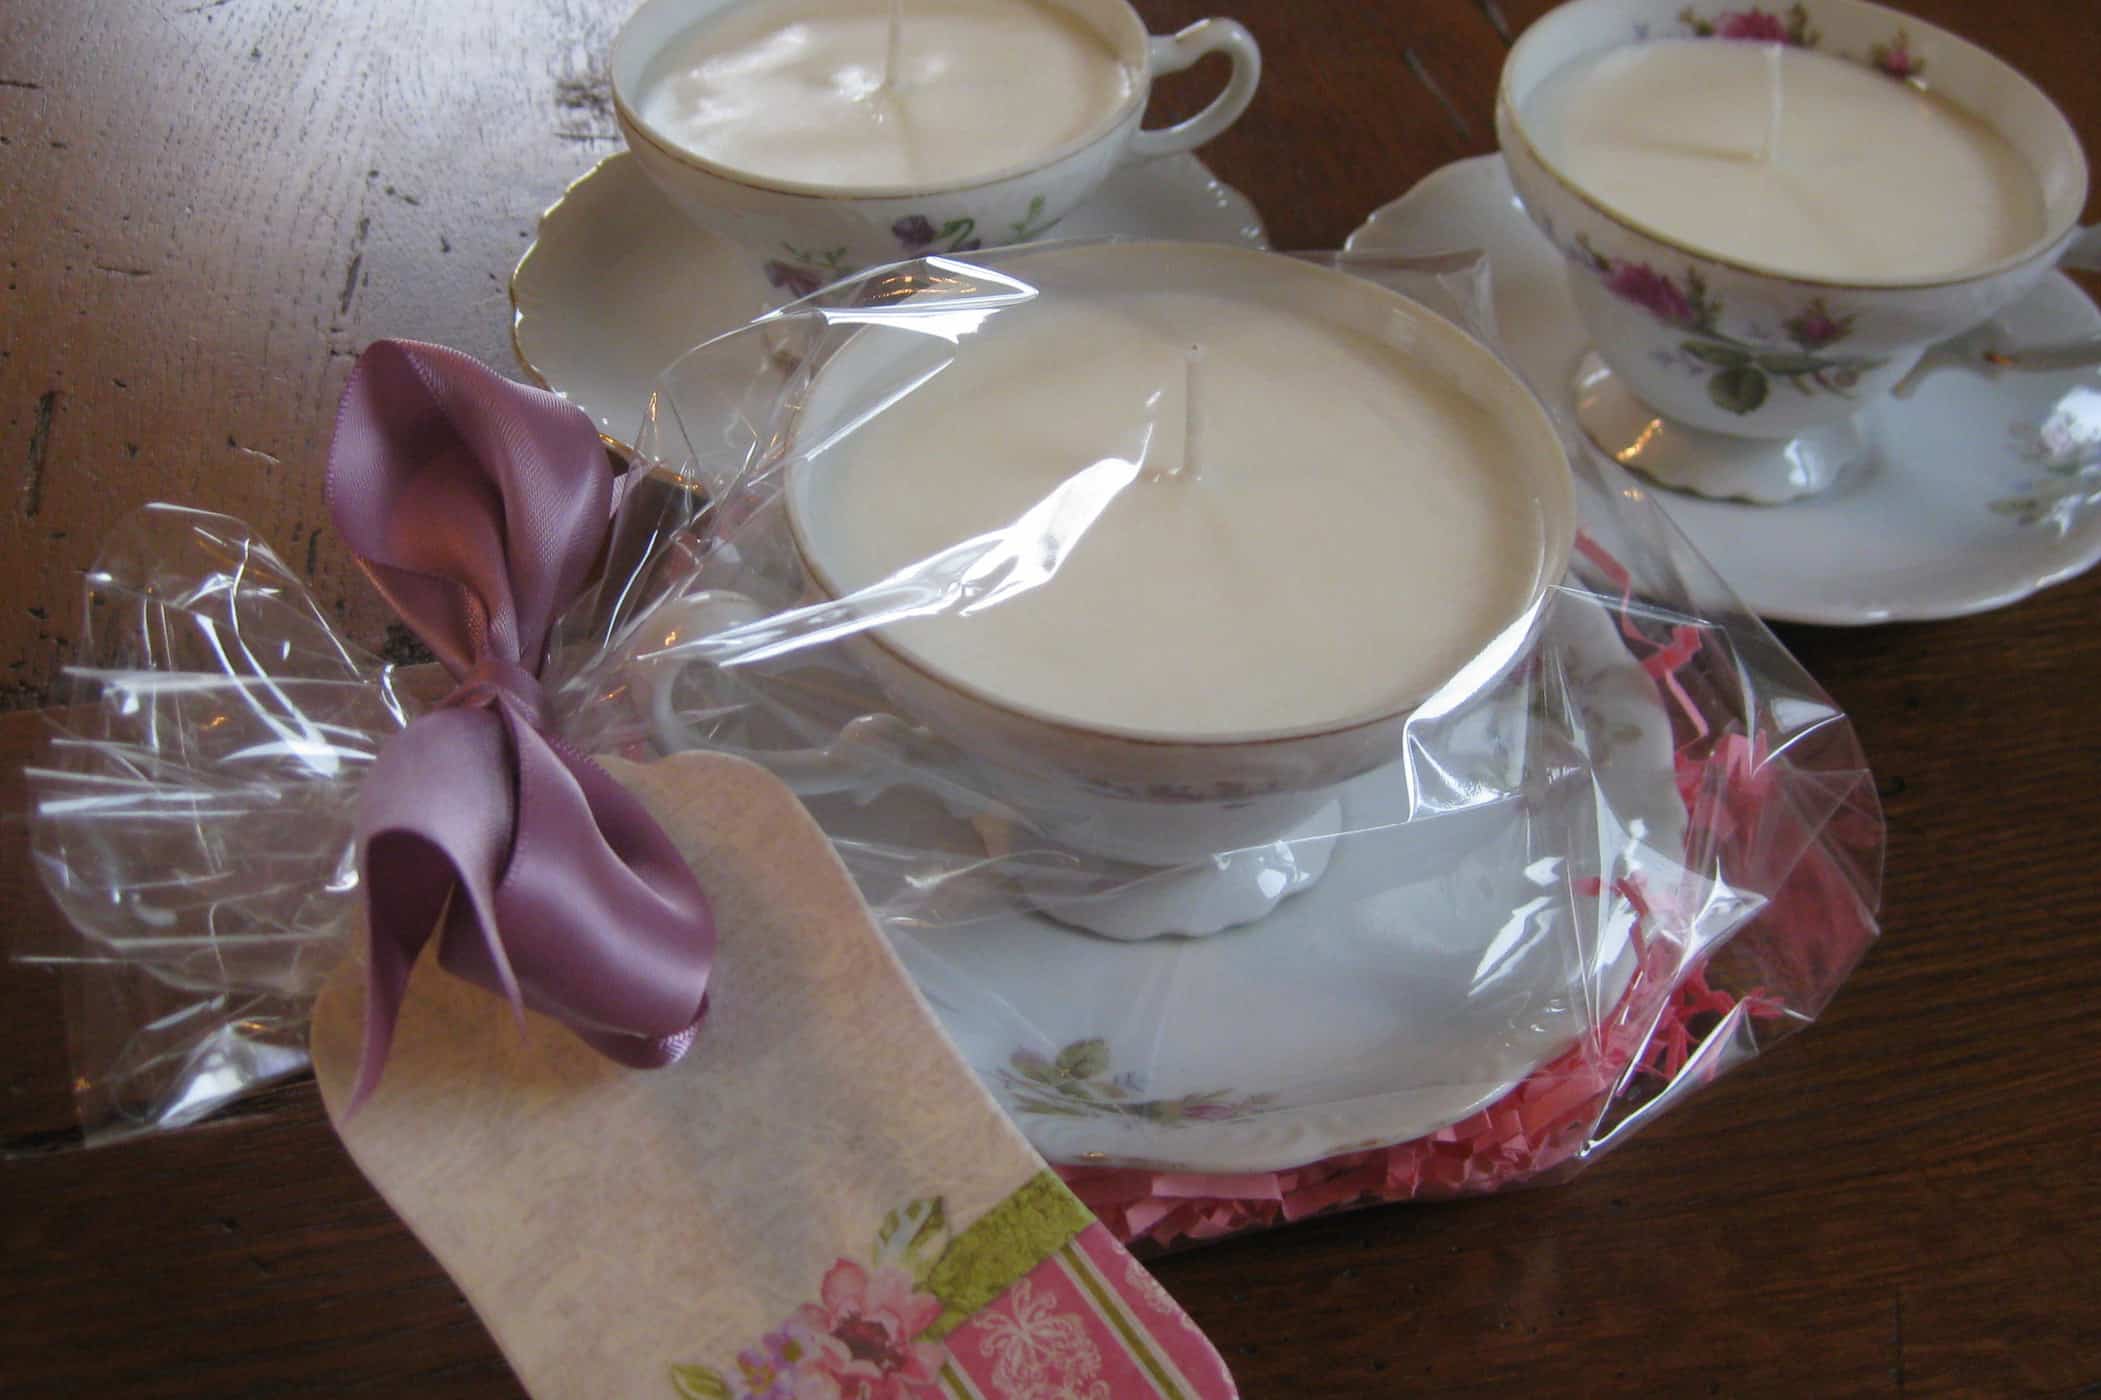 how to make a candle in a teacup, gift wrapping ideas